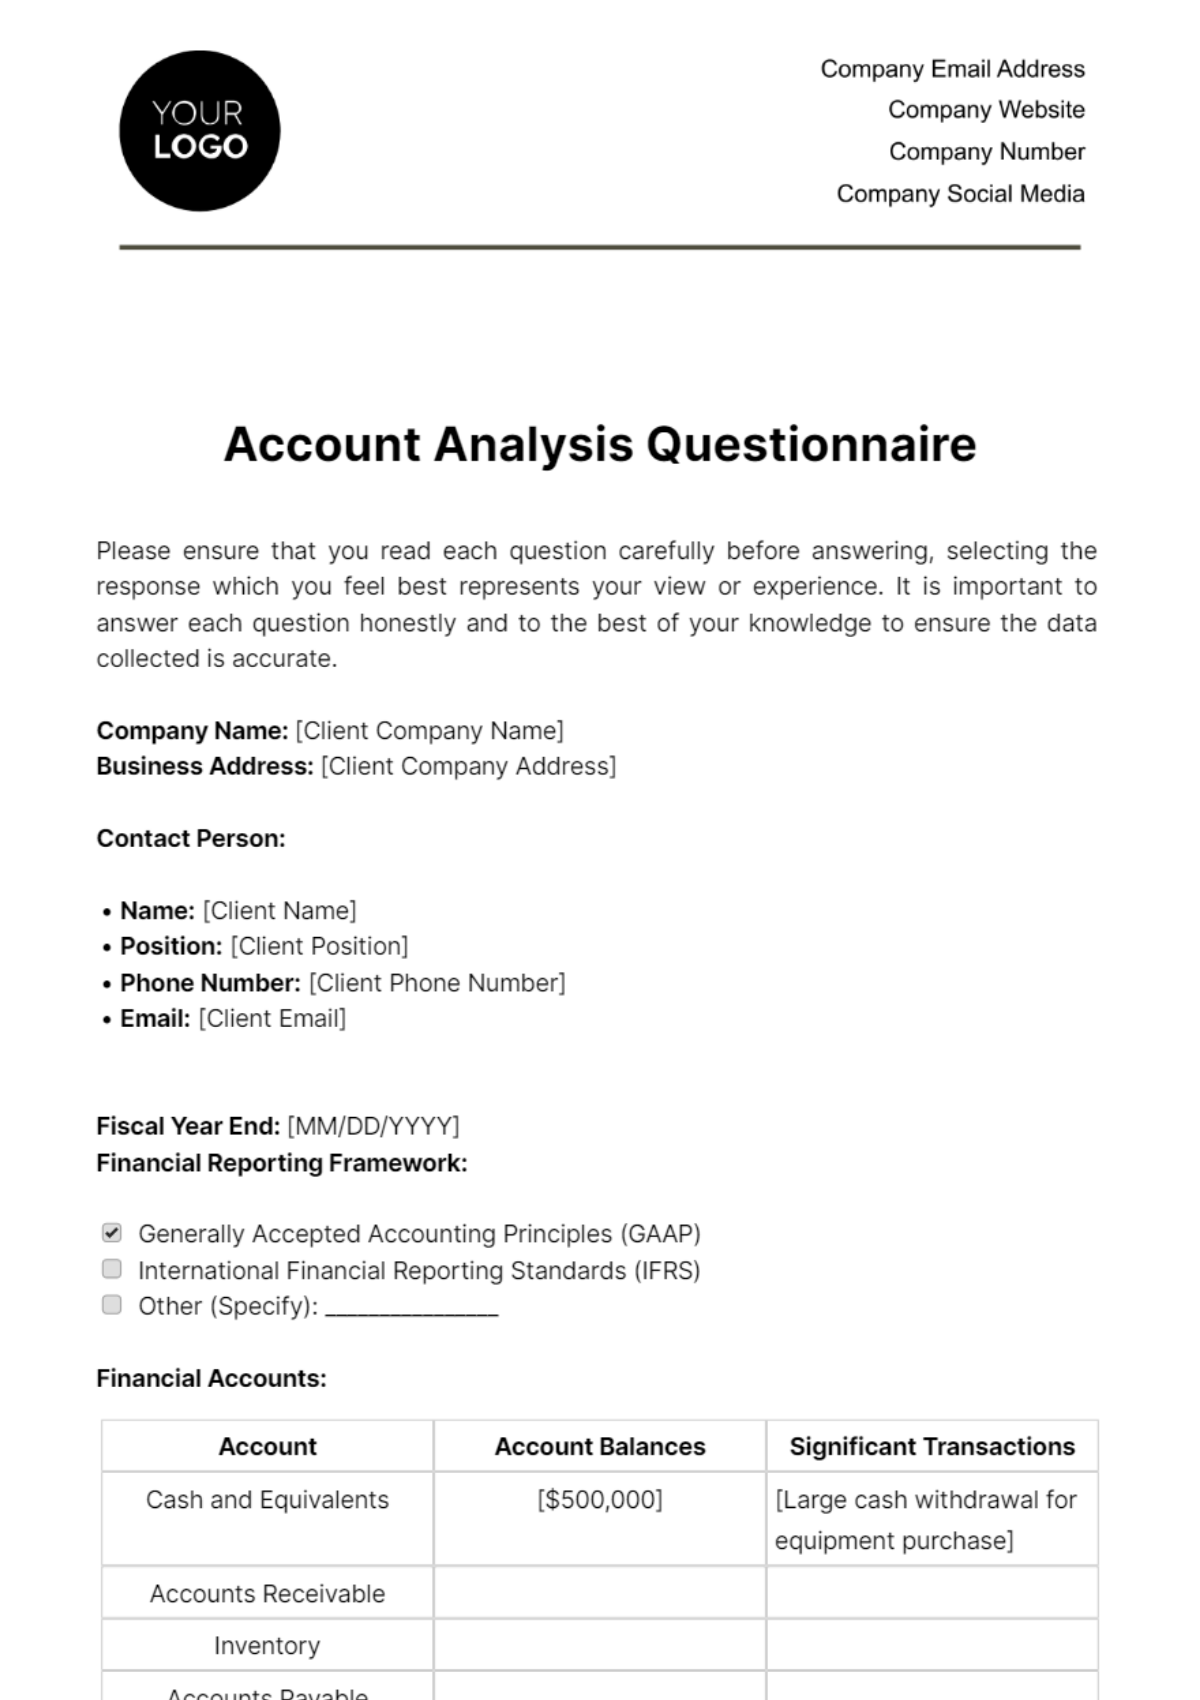 Account Analysis Questionnaire Template